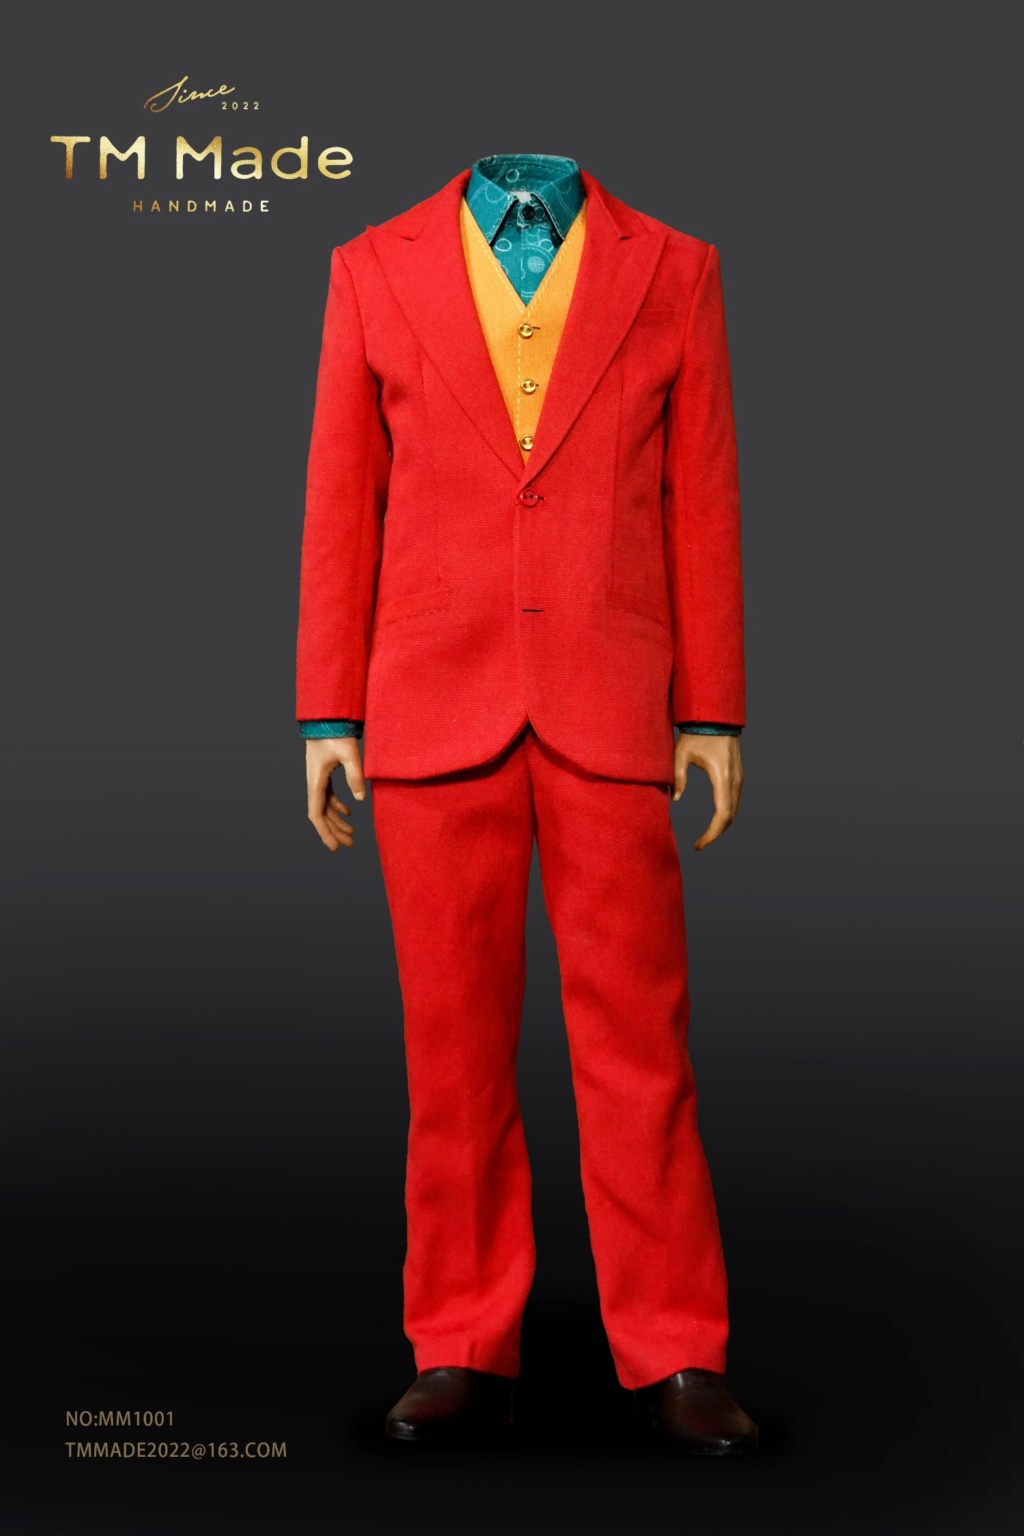 Clothing - NEW PRODUCT: TM MADE MM1001 - 1/6 Scale Red Suit Set (Joker) 12251910